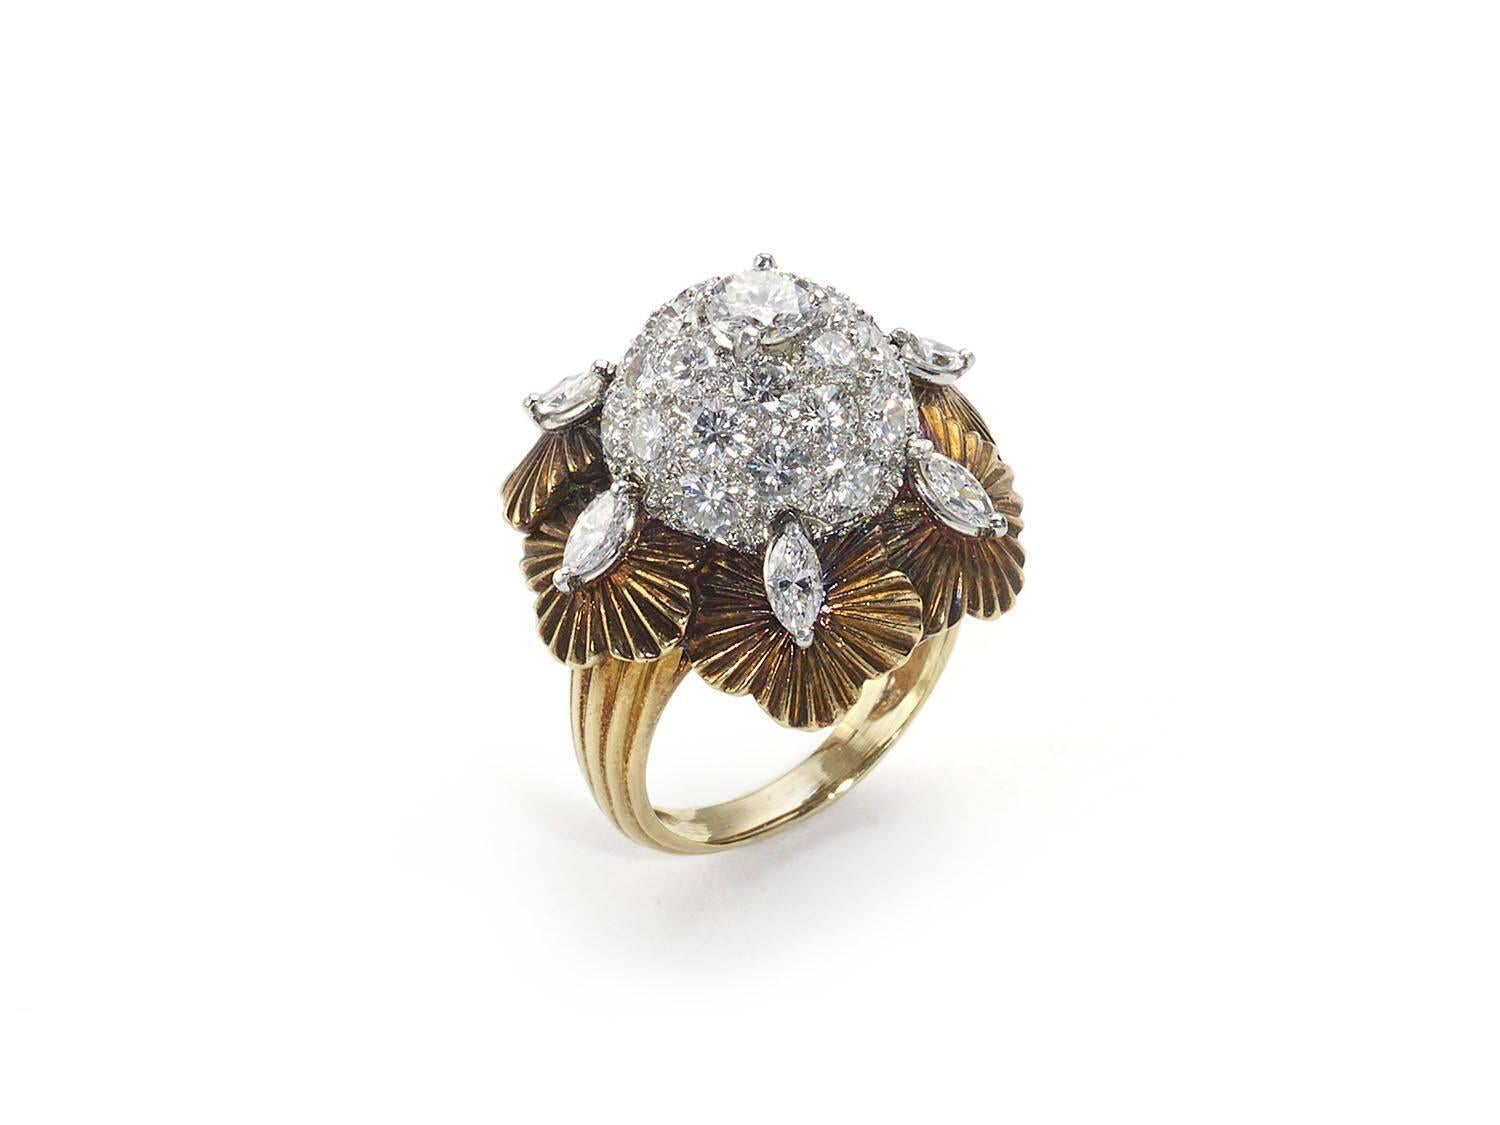 A vintage bombé diamond flower ring, pavé set with round brilliant-cut diamonds, surrounded by marquise-cut diamonds, on gold leaves, mounted in 18ct gold. Circa 1960s. Estimated total diamond weight 3.00ct 

Finger size M½ / USA 6¼